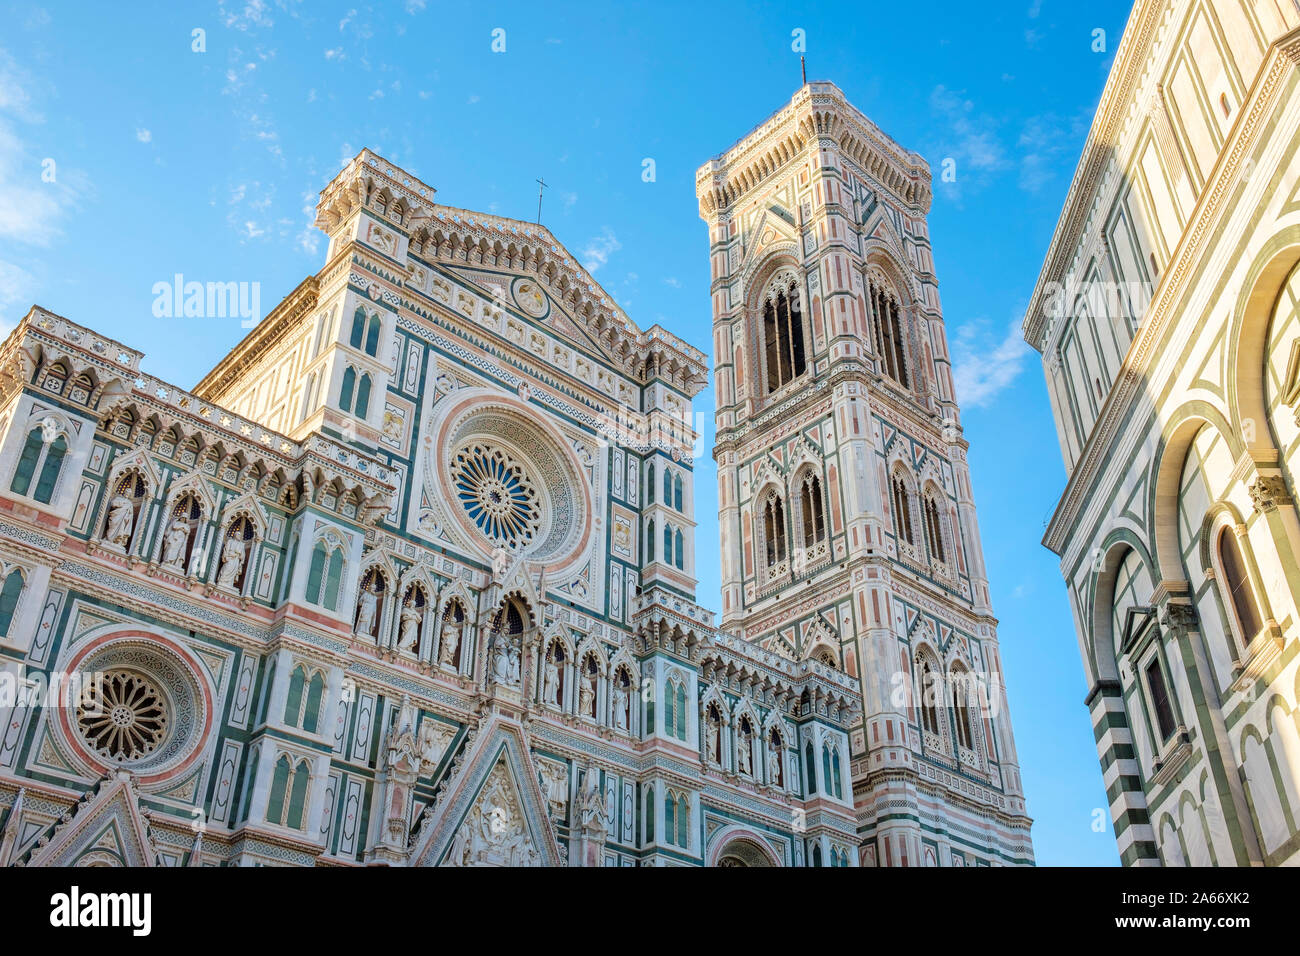 Gothic Revival faÃ§ade of Florence Cathedral (Duomo di Firenze). UNESCO ...